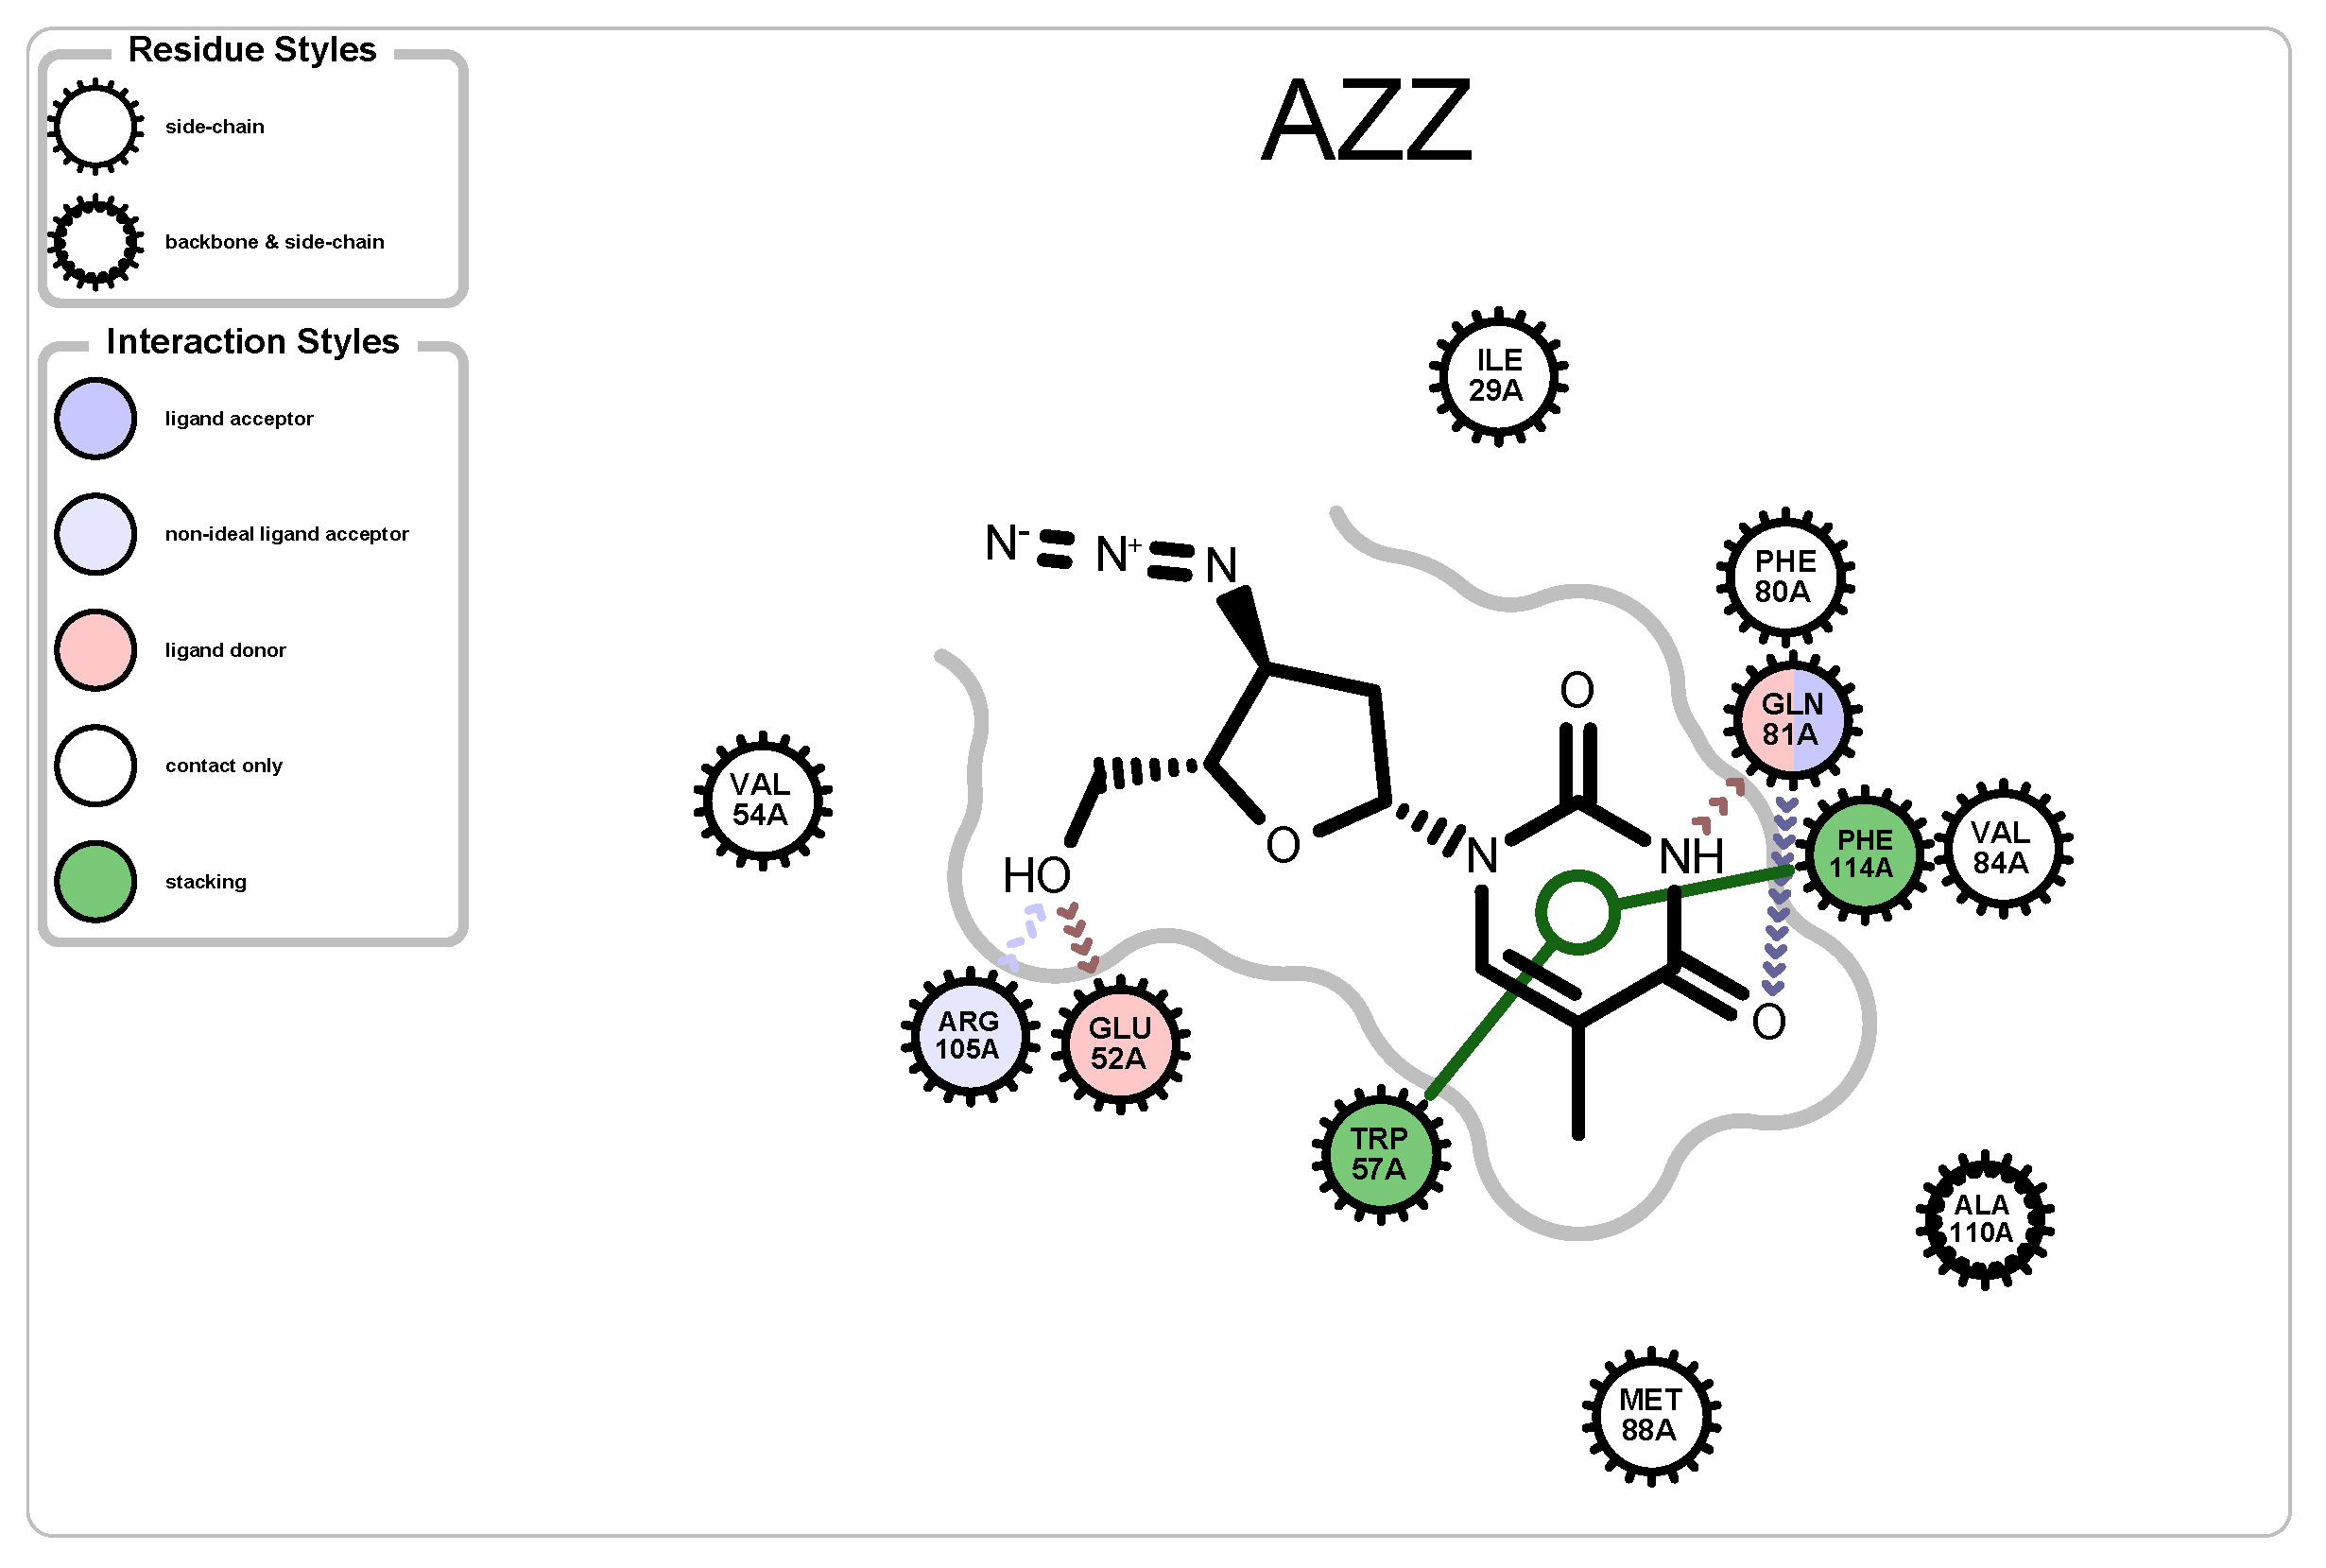 An image representing the interaction of a ligand, labeled AZZ, with amino acid residues of a protein or enzyme. The ligand AZZ is in the center, with various molecular interactions illustrated by lines connecting it to surrounding residues named by their three-letter amino acid codes and position numbers (like ILE 29A, VAL 54A, etc.). There's a legend on the left side with two sections: Residue Styles and Interaction Styles. Residue Styles has icons representing side-chains and backbone & side-chain. Interaction Styles uses colored circles to denote different types of interactions: ligand acceptor (purple), non-ideal ligand acceptor (blue), ligand donor (pink), contact only (white), and stacking (green) Amino acid residues are shown with these colored circles based on their interaction with the ligand. For example, TRP 57A shows a stacking interaction (green circle) with the ligand. There are also dashed lines indicating hydrogen bonds and dotted lines indicating other non-covalent interactions. The molecular structure of AZZ is highlighted with atoms and bonds: double lines for double bonds, and a zigzag structure representing a chemical ring or chain.